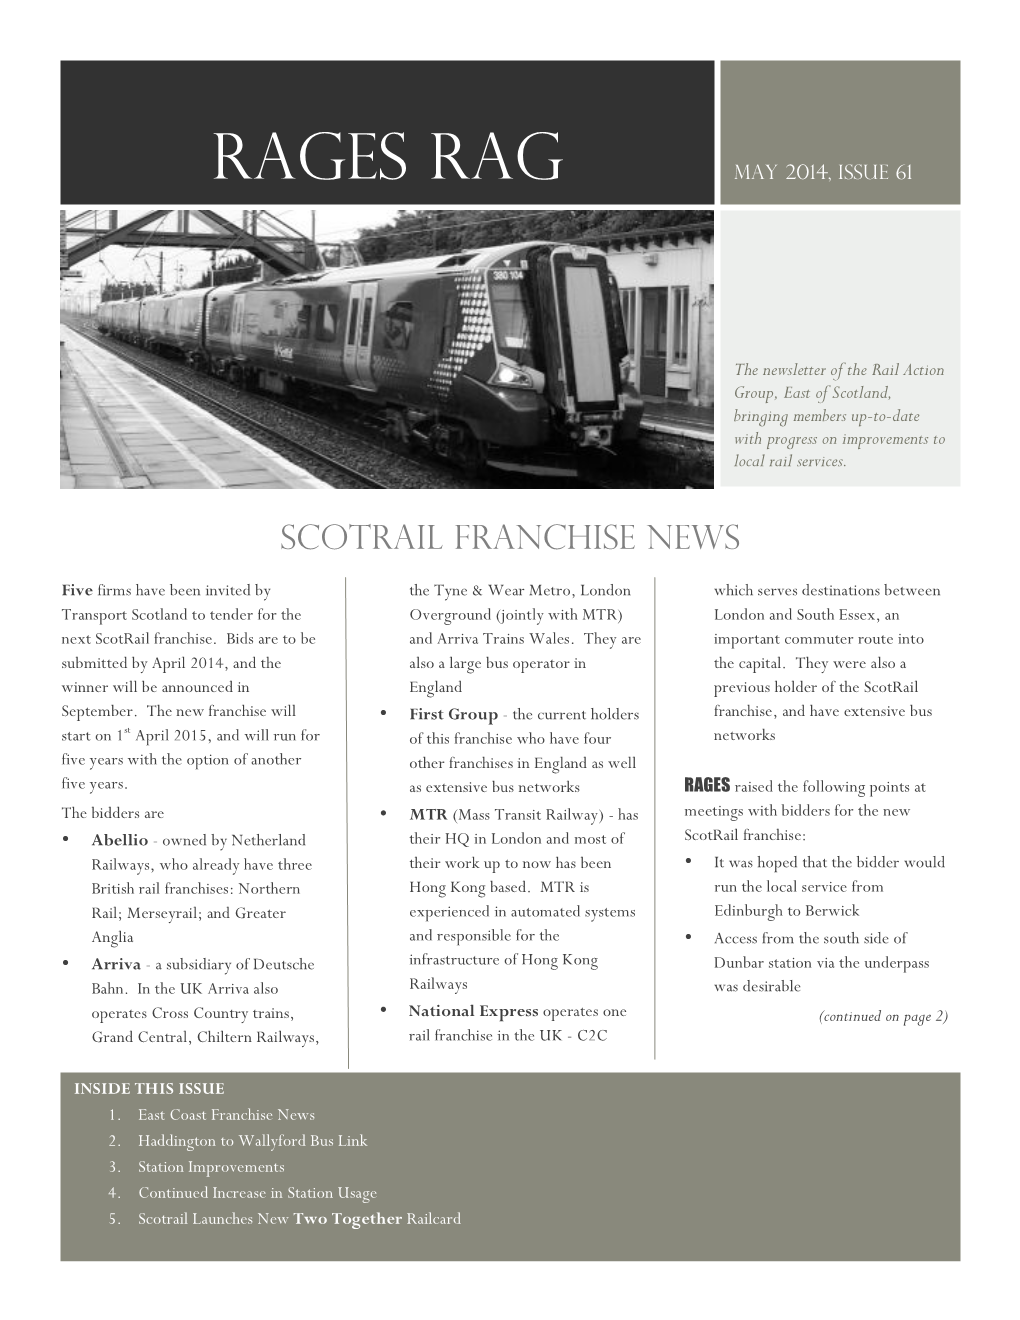 RAGES RAG May 2014, Issue 61